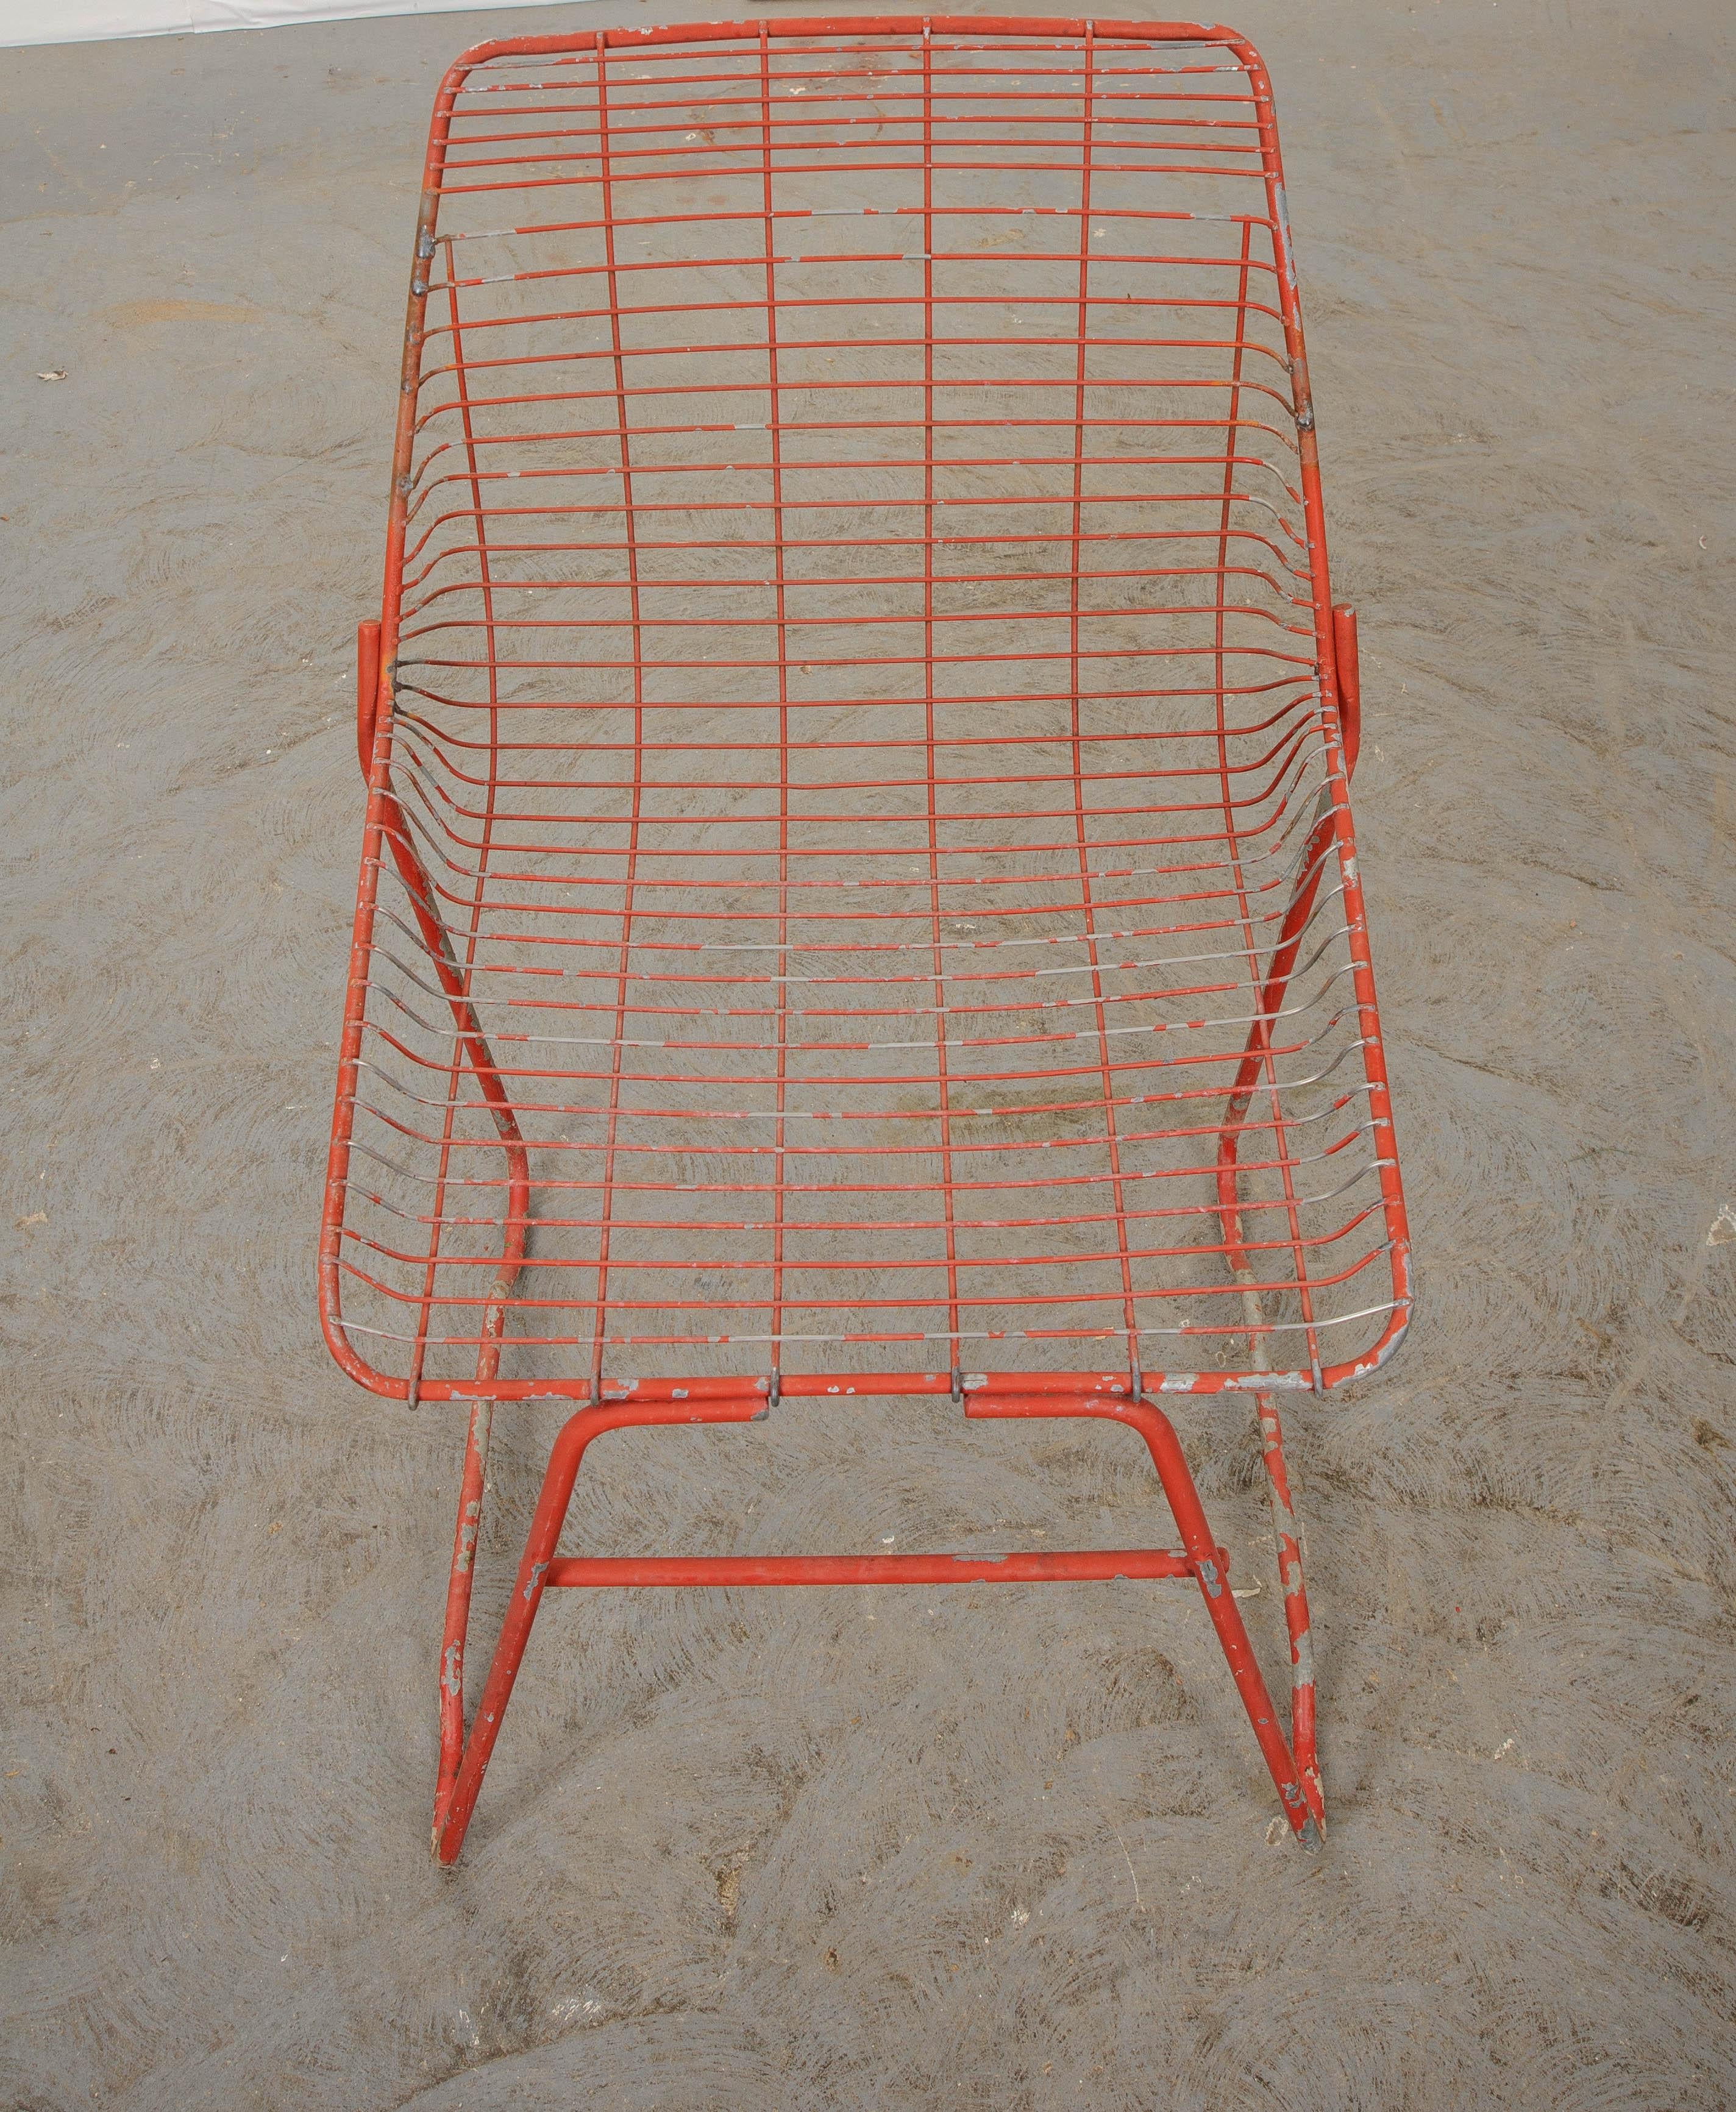 A fantastic set of painted garden chairs from 20th century, France. The chairs have seats and backs that are formed from molded metal grids. This technique gives the chairs a modern style that is both fashionable and comfortable. They are currently